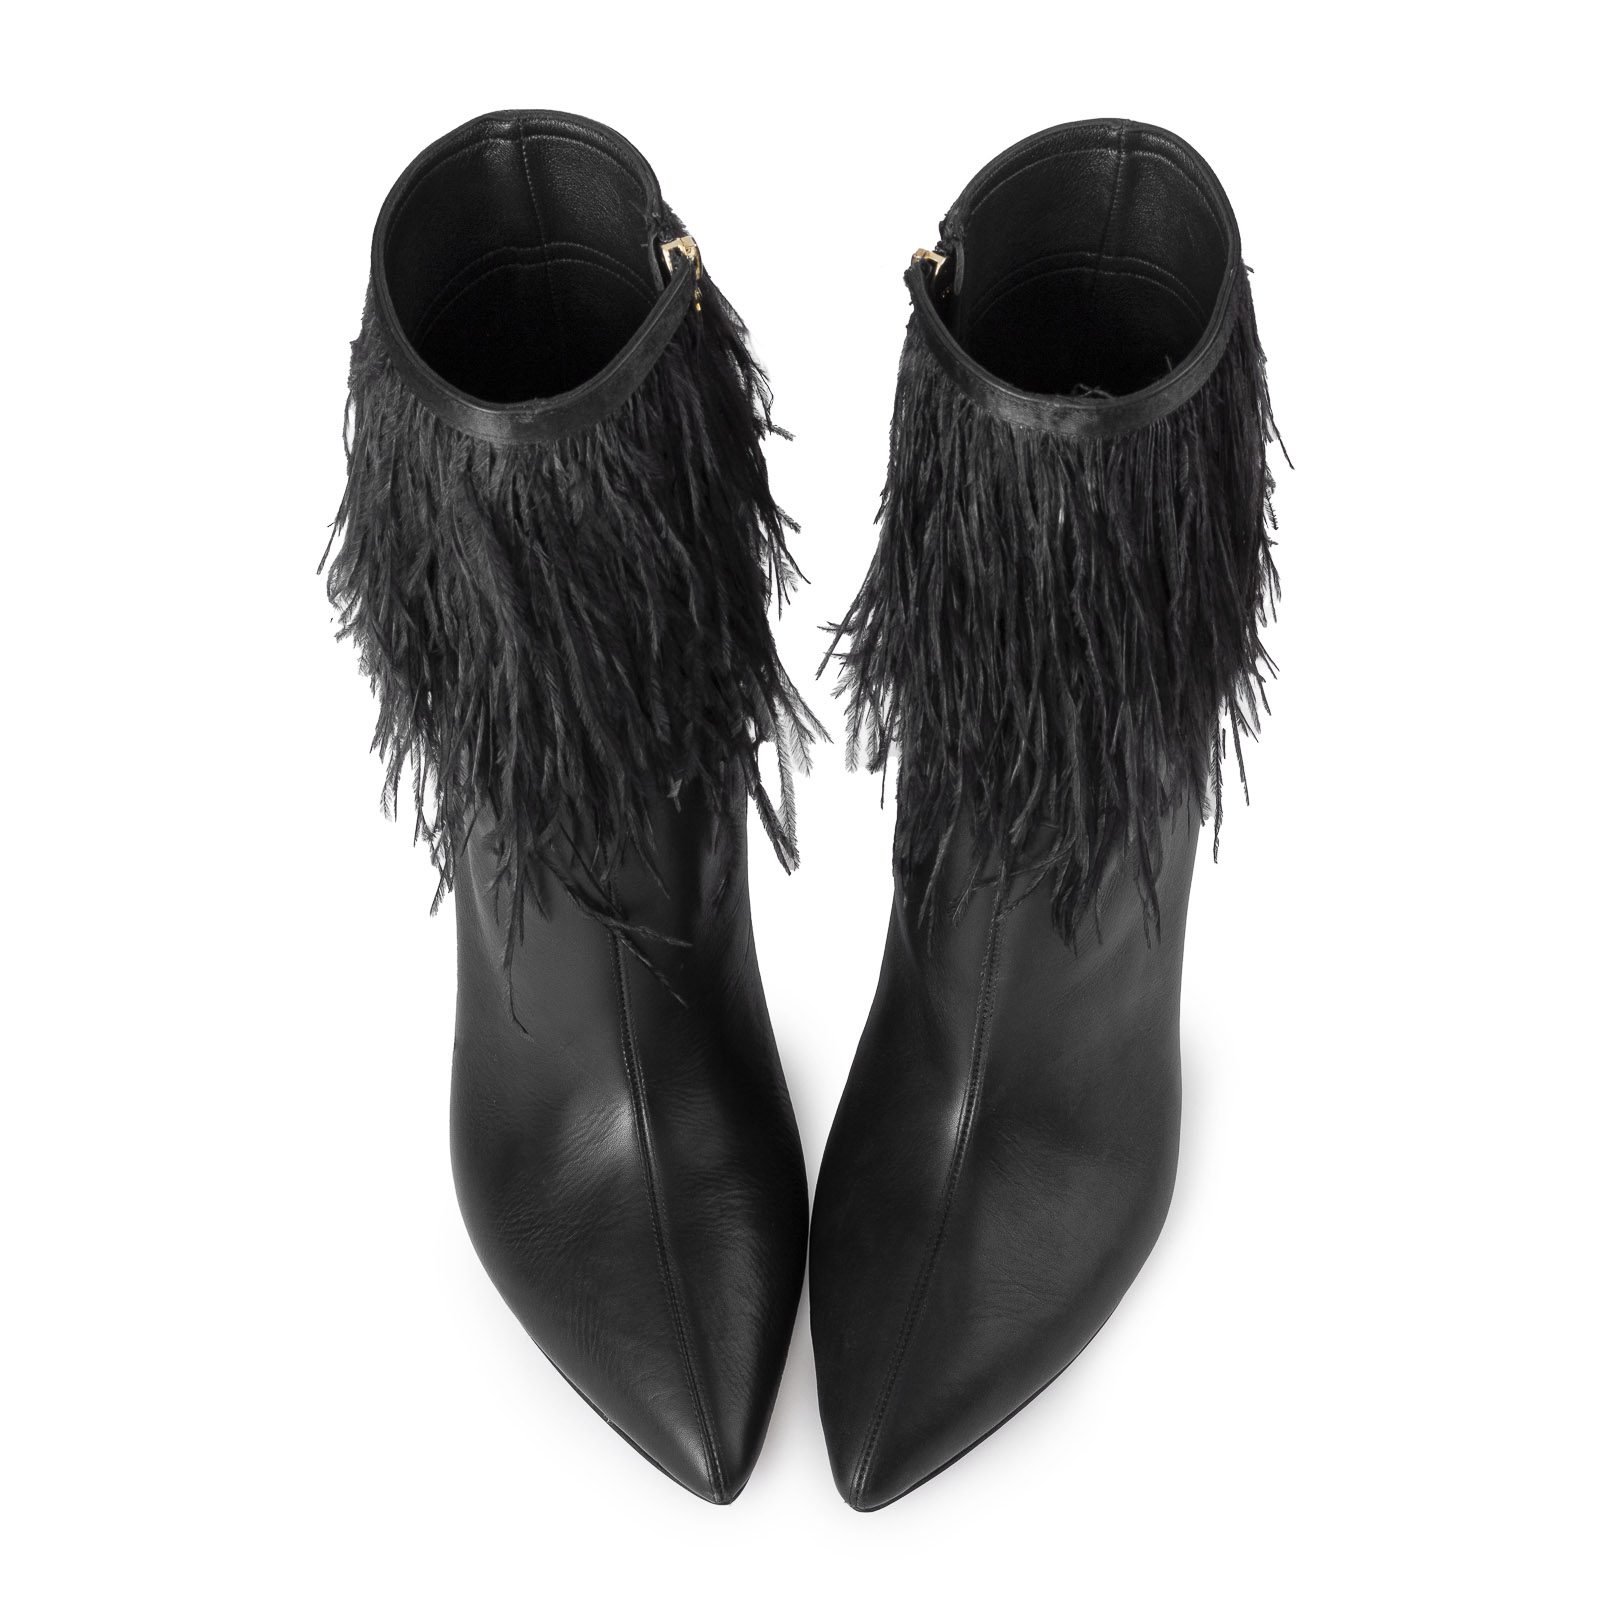 Black Booties with Ostrich feathers